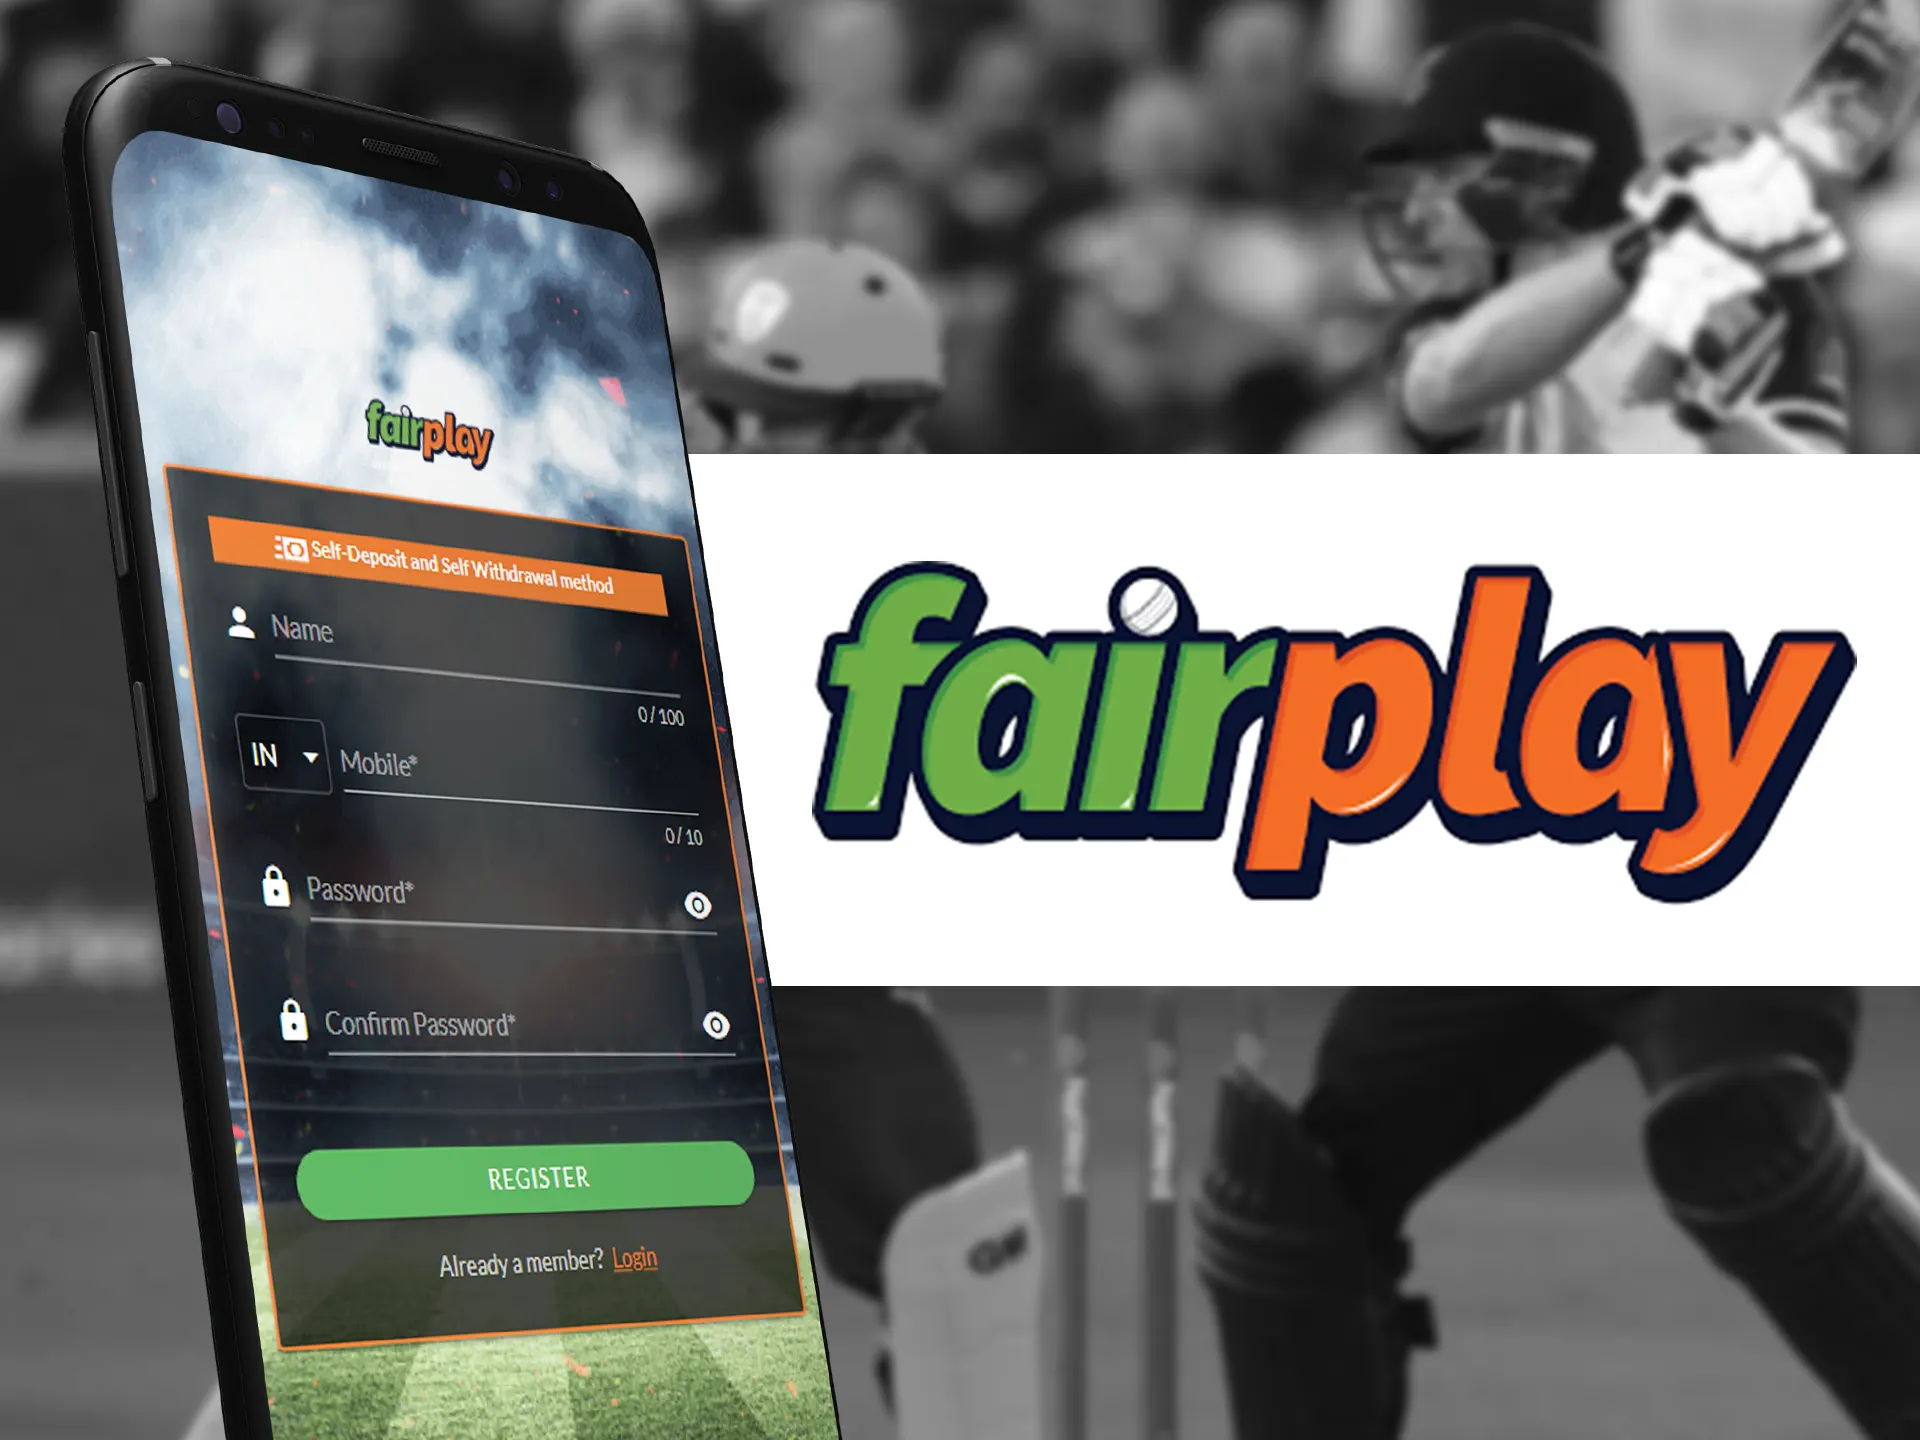 Make new account in Fairplay app.